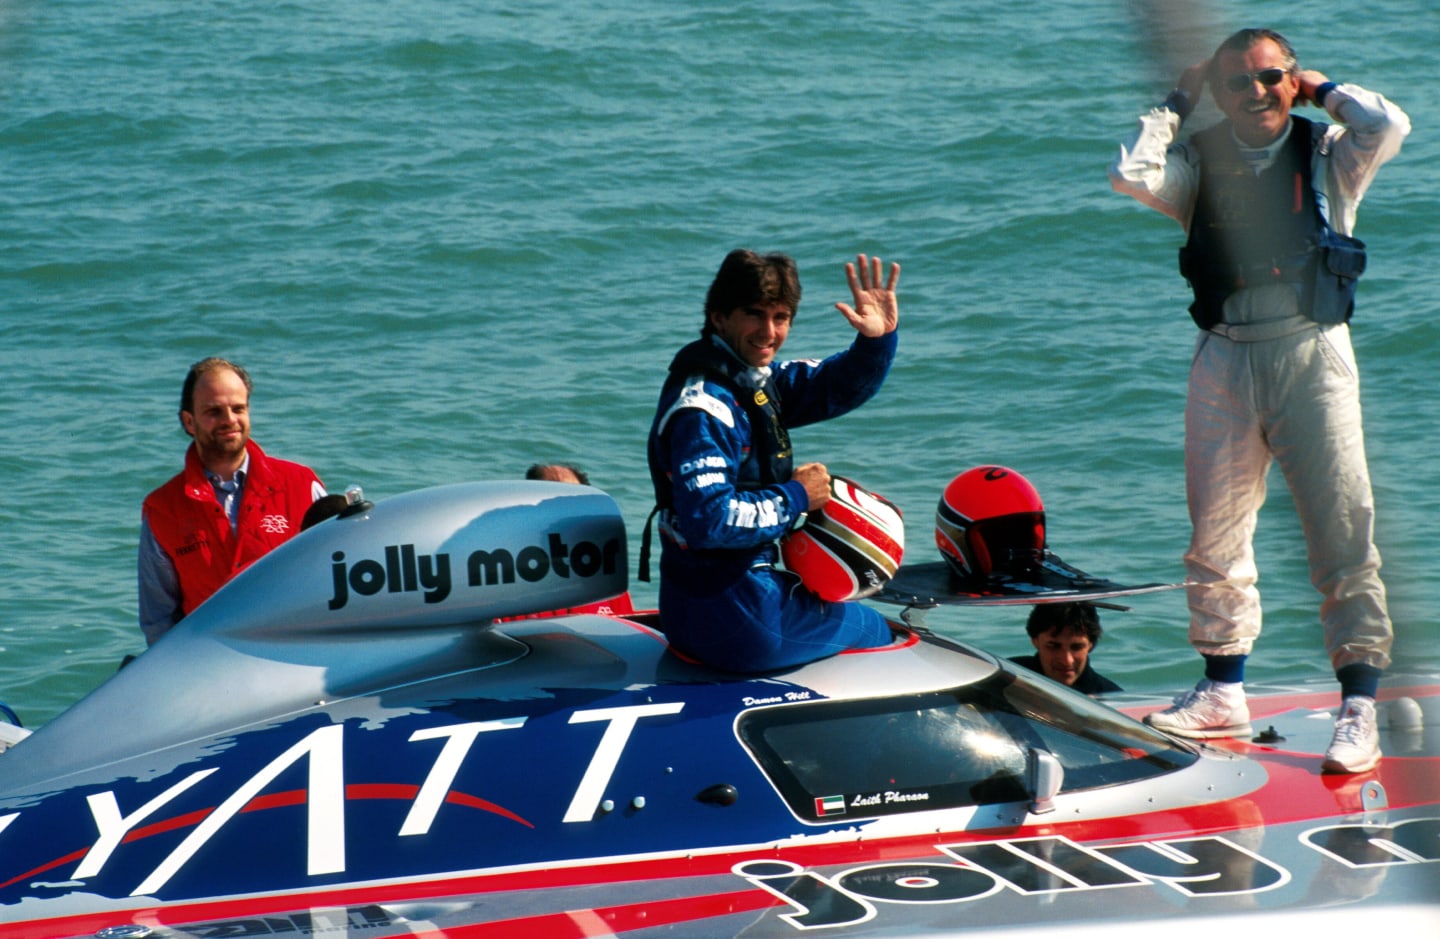 Damon Hill (GBR), Arrows A18 DNF tries his hand at powerboating
Formula One World Championship, San